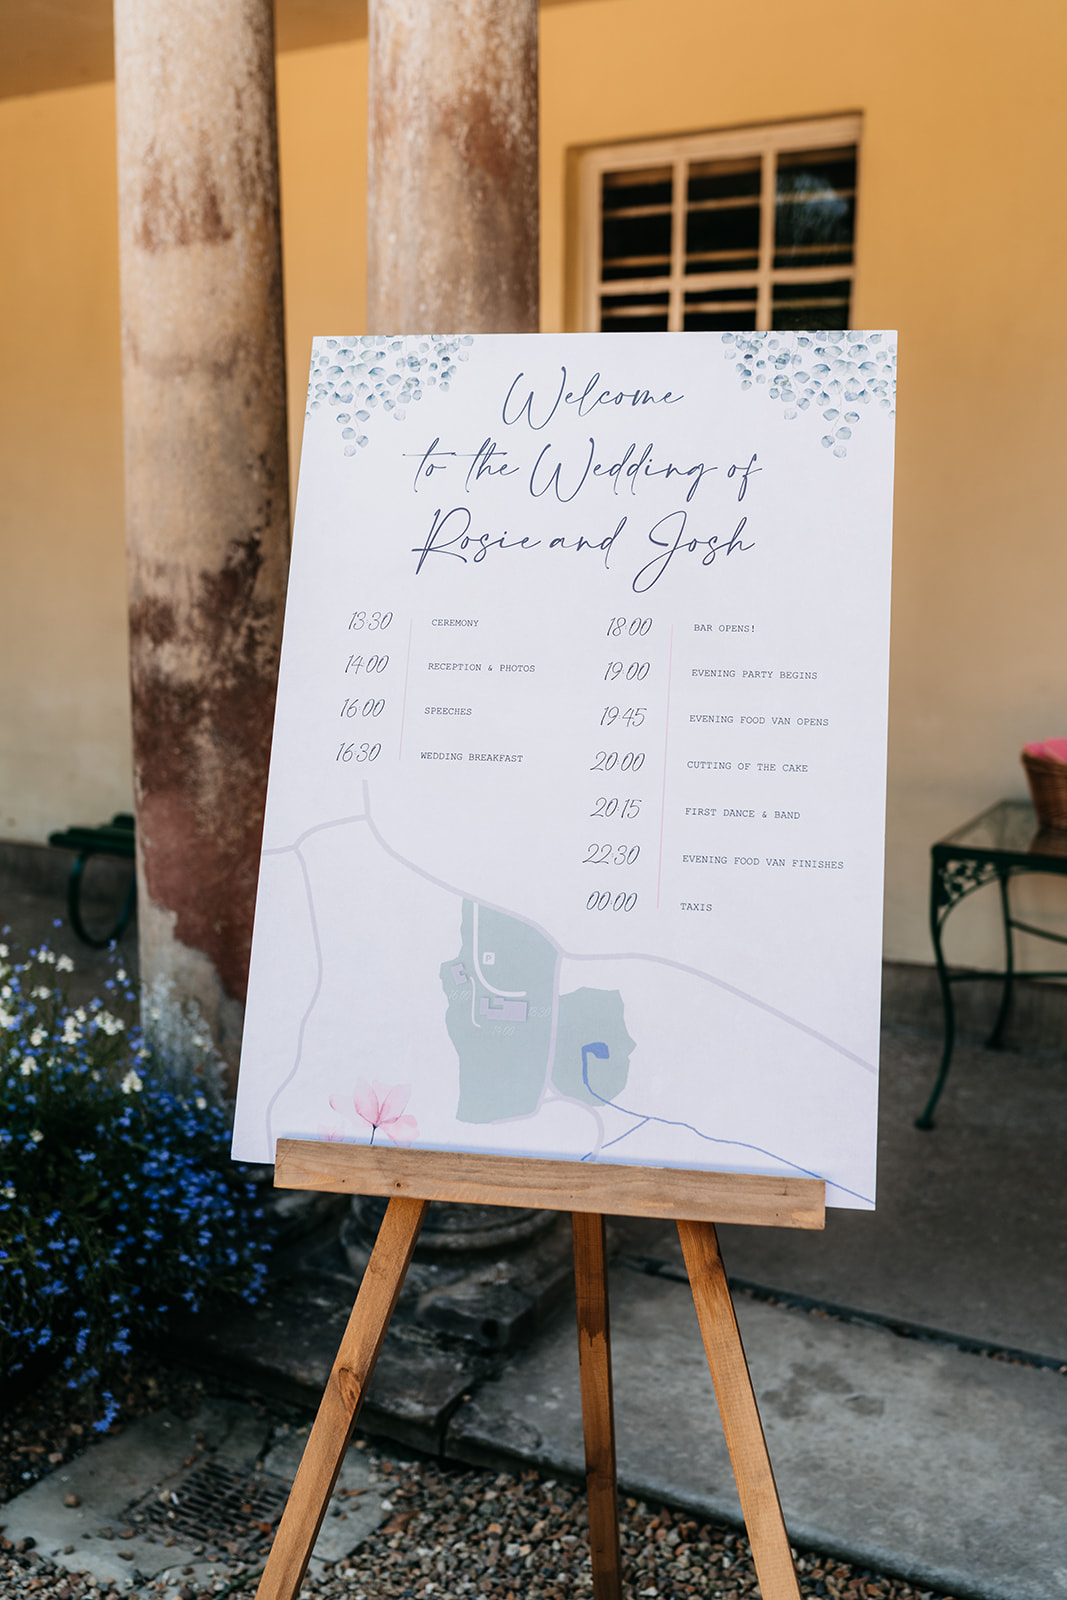 Wedding styling showing the wedding day plan